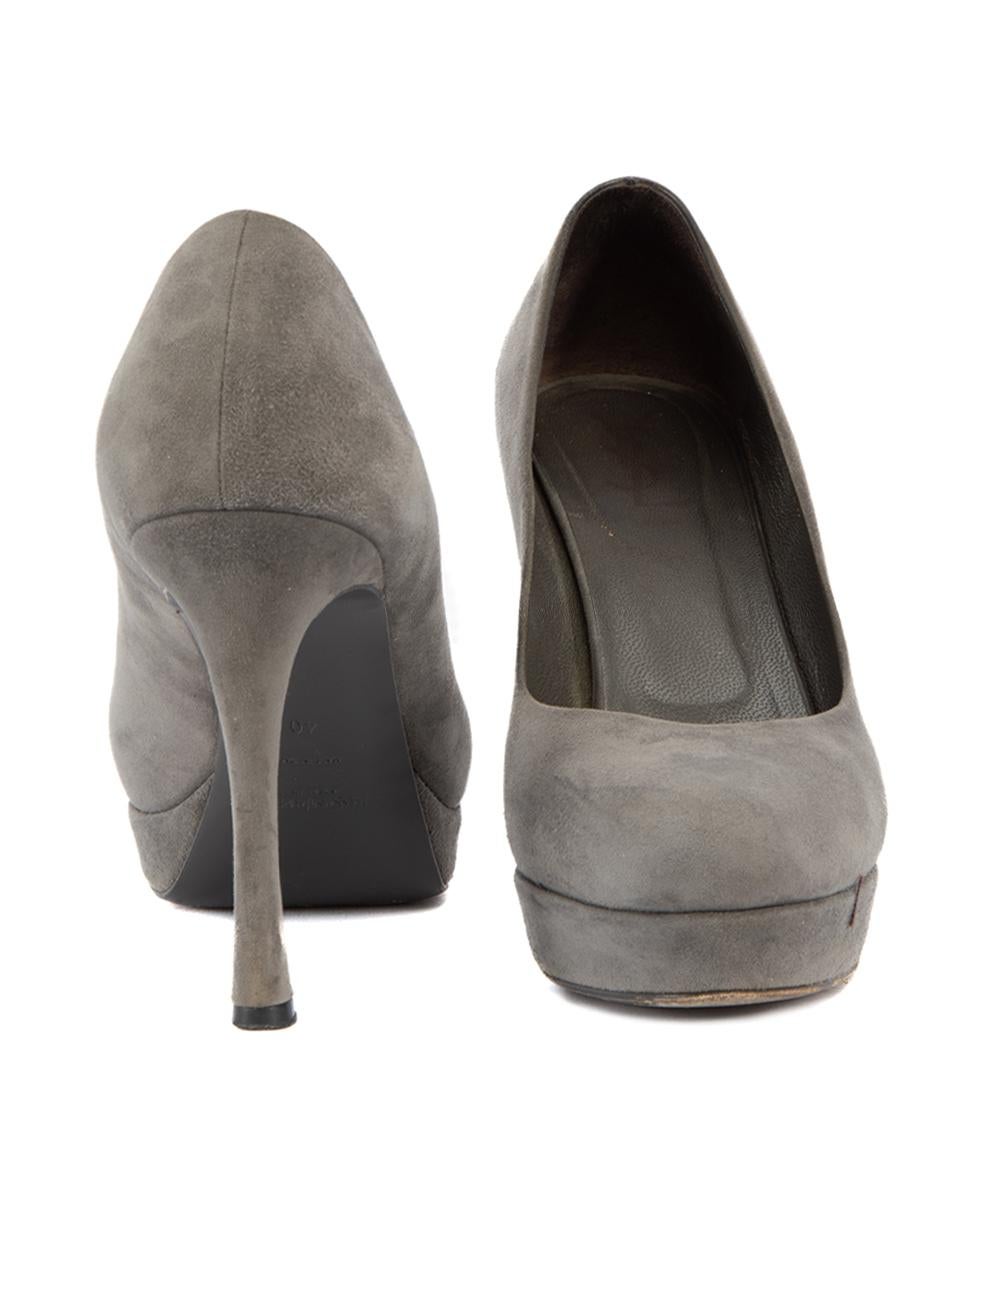 Pre-Loved Yves Saint Laurent Women's Grey Suede Platform Round Toe Heels In Excellent Condition For Sale In London, GB